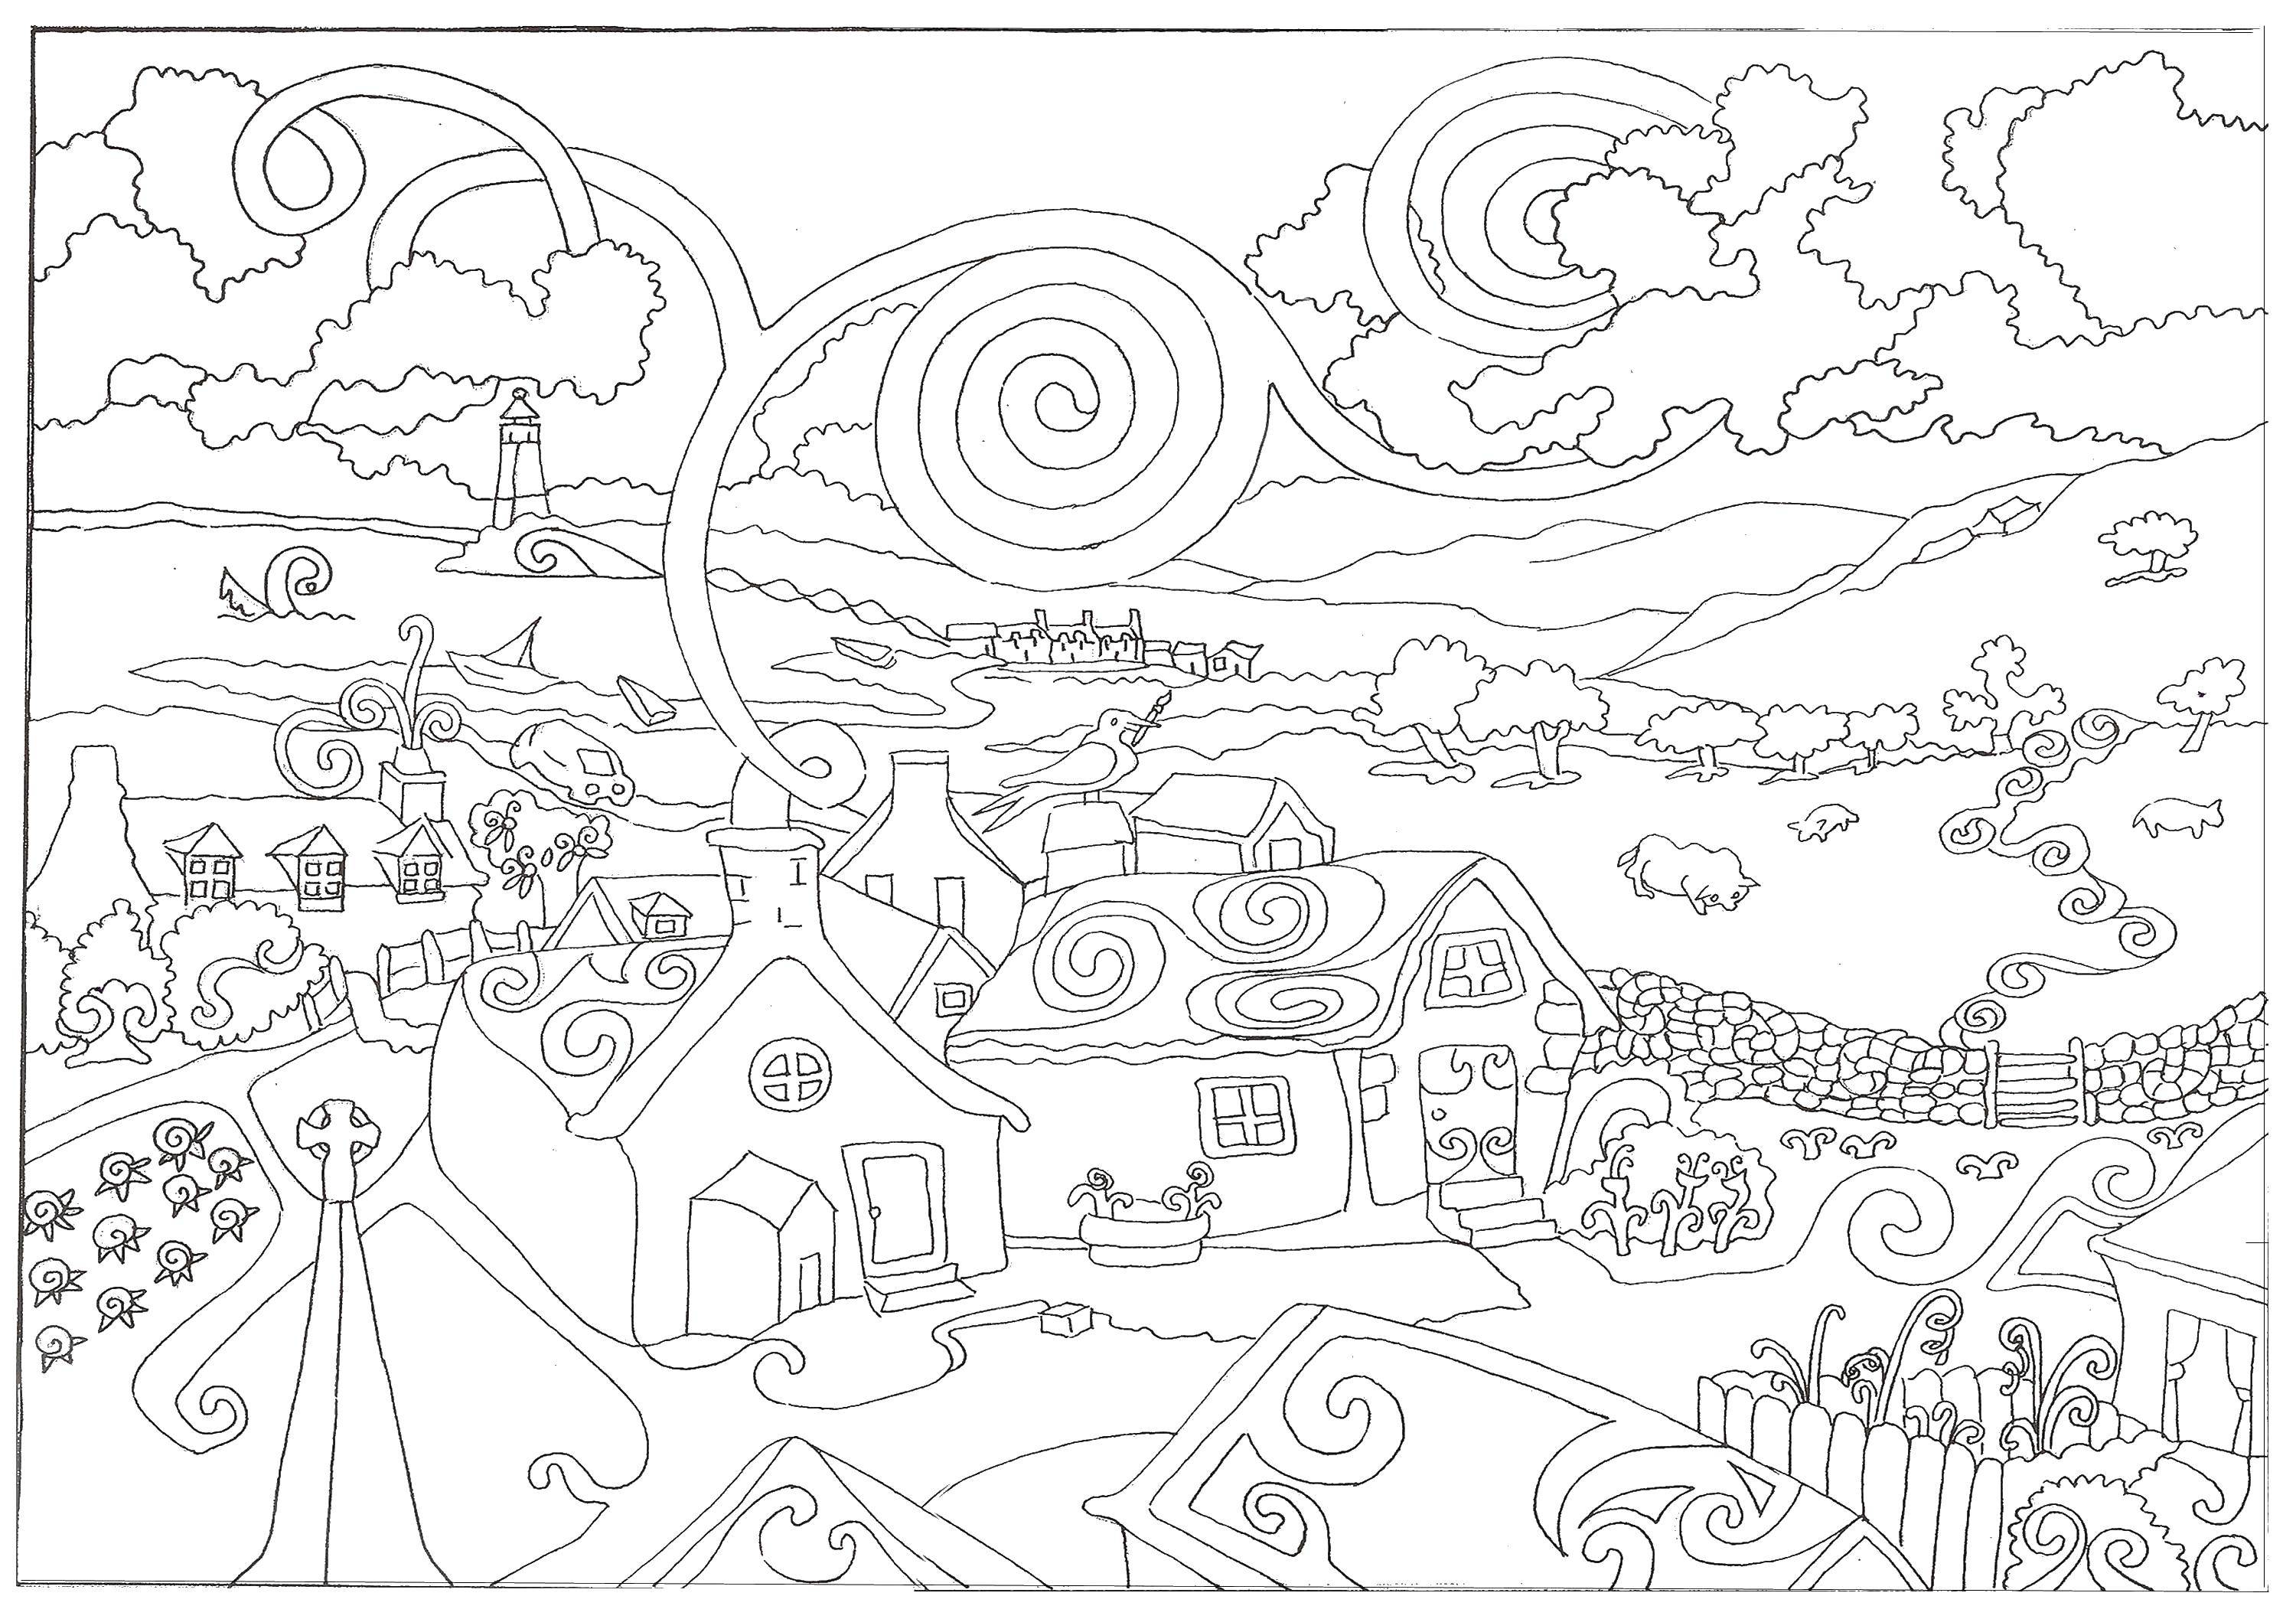 Coloring Village. Category The contours of the cartoons. Tags:  the village.